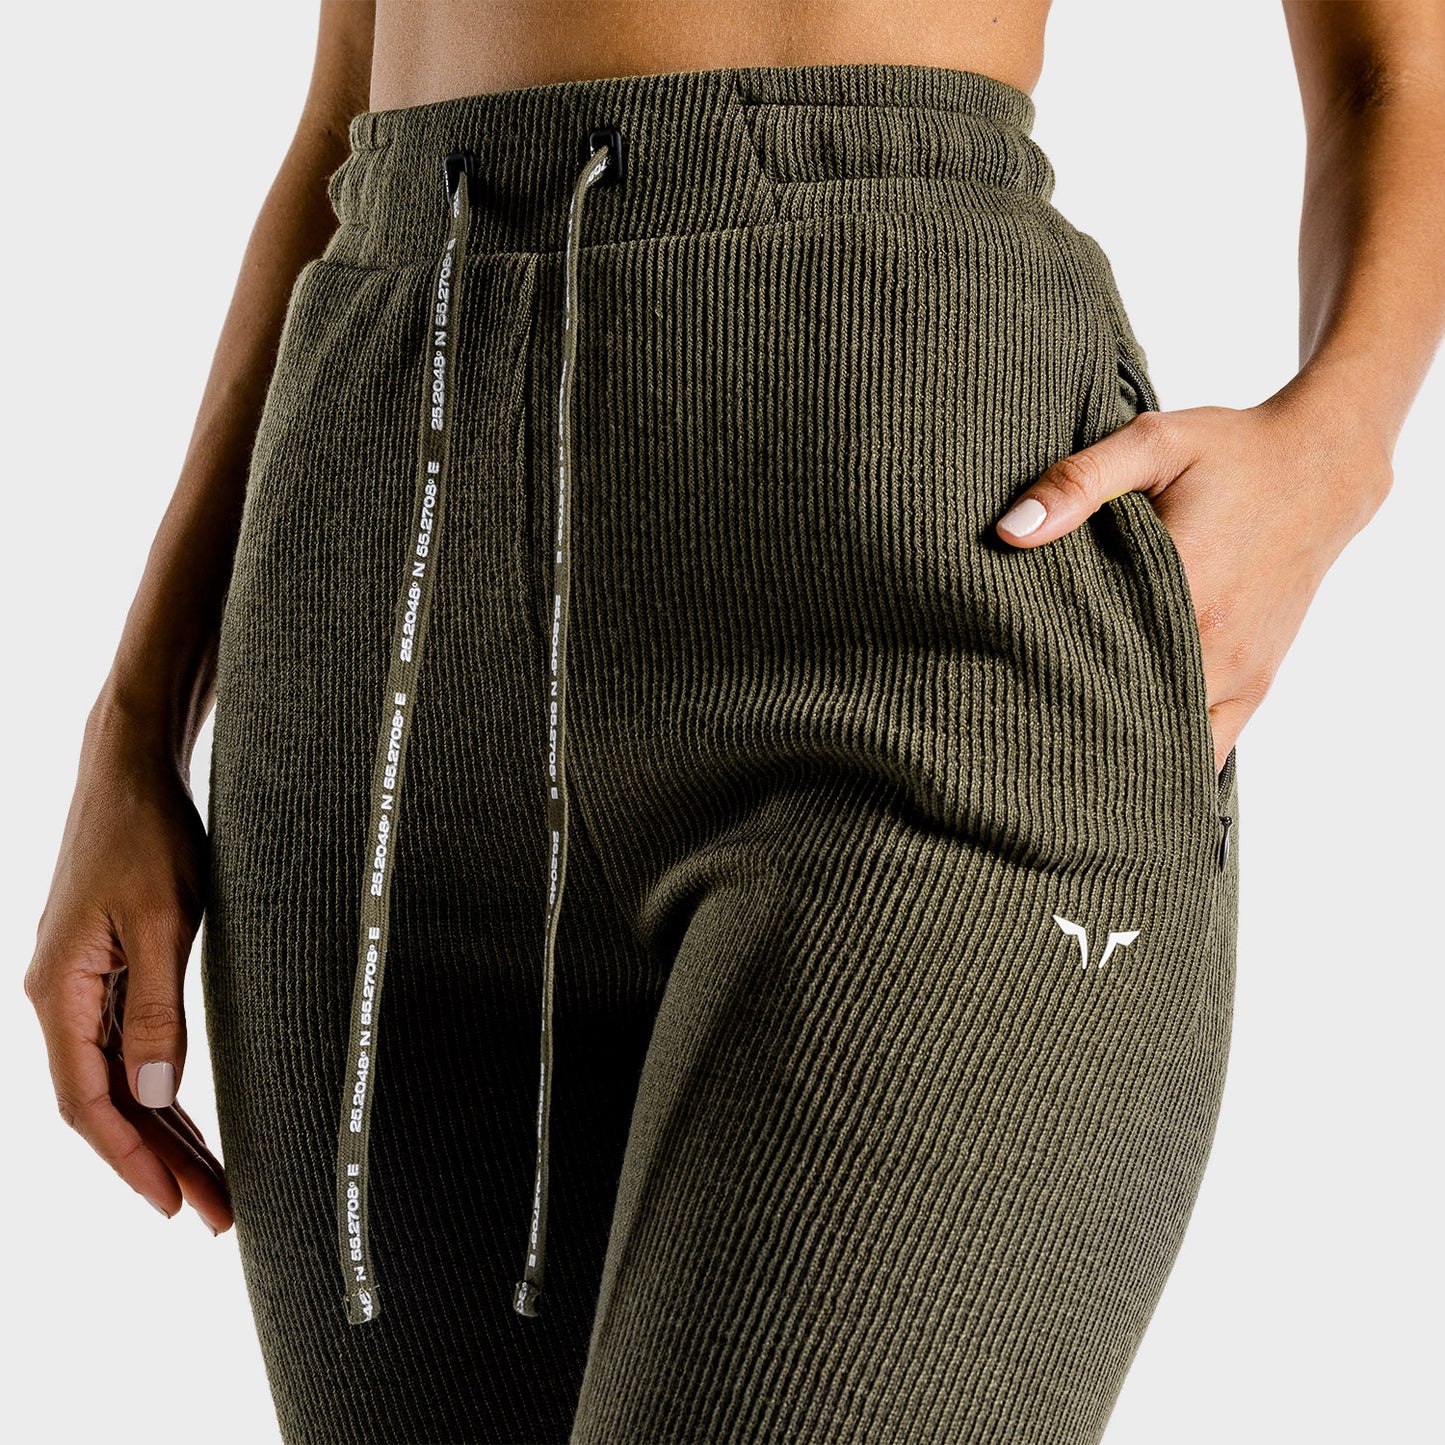 squatwolf-pants-for-women-luxe-joggers-olive-gym-workout-clothes